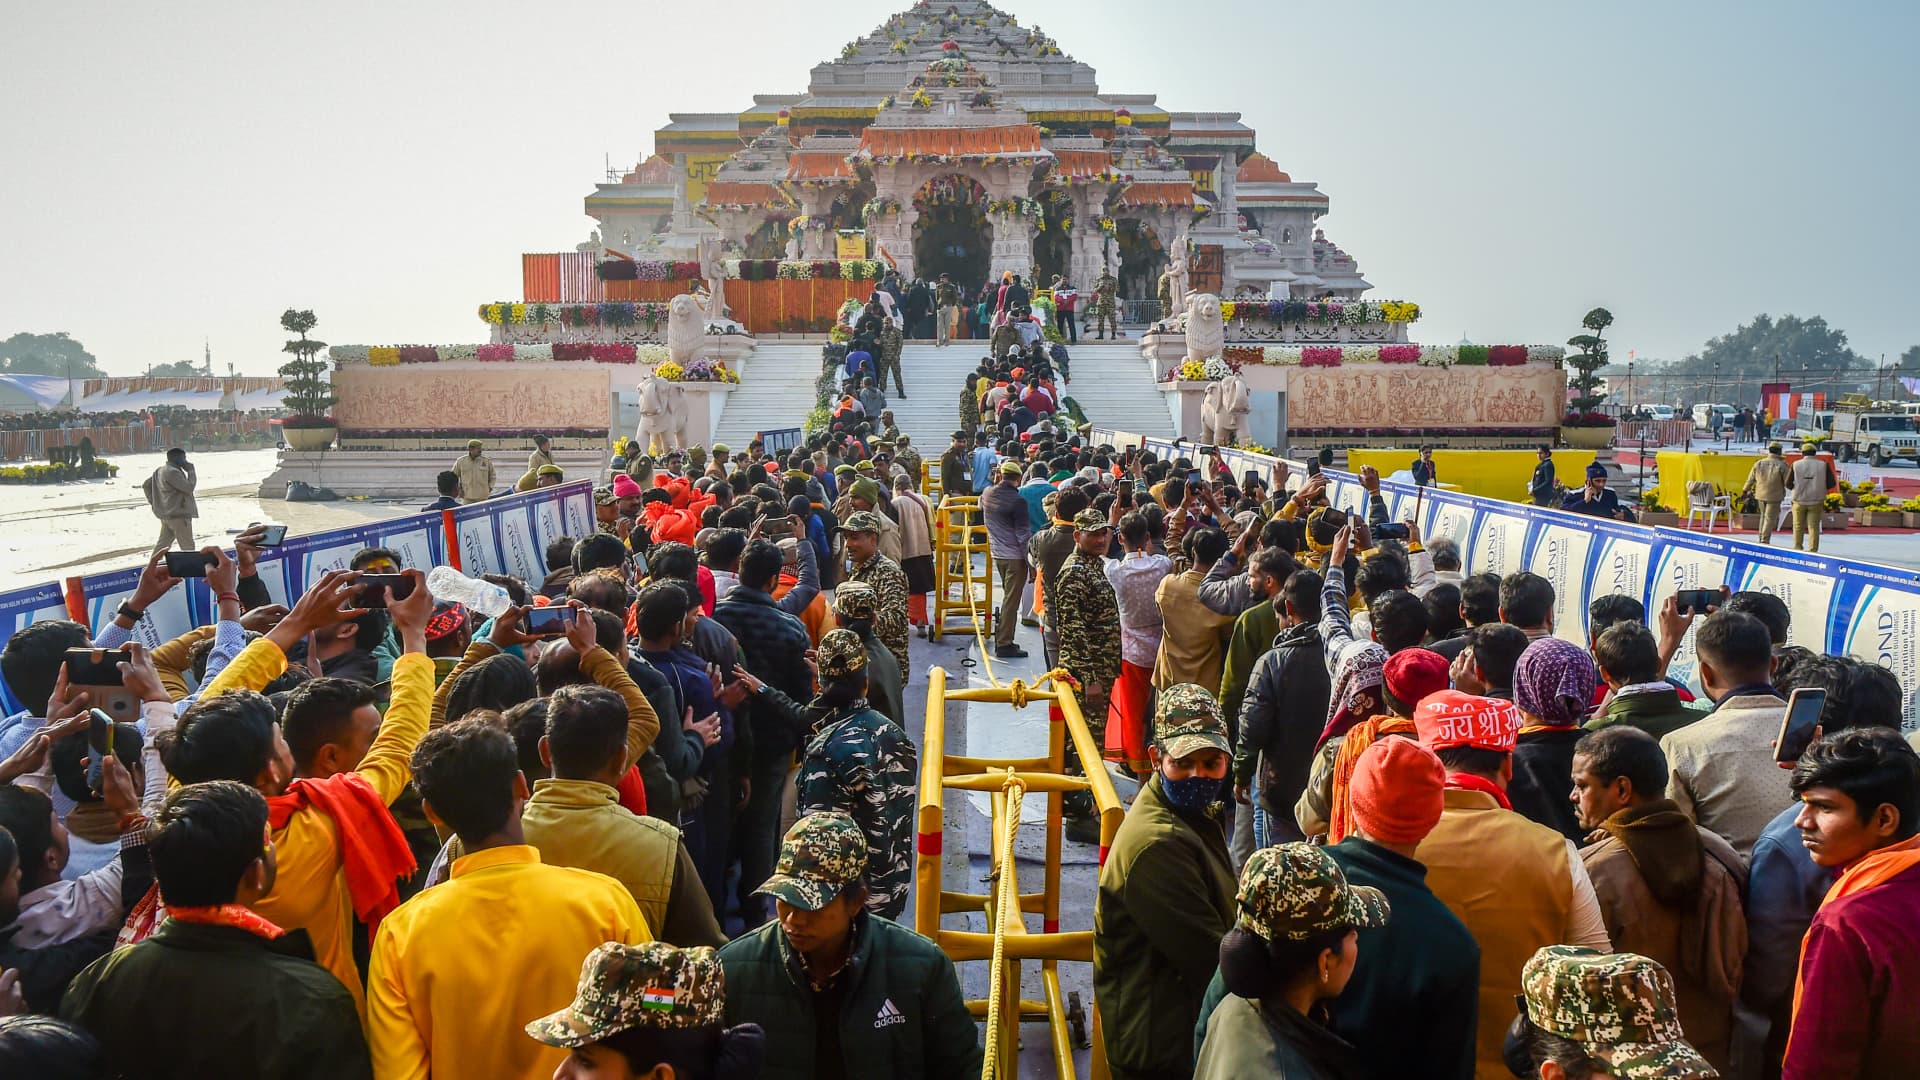 India’s tourism sector is set for a boom, powered by religious trips